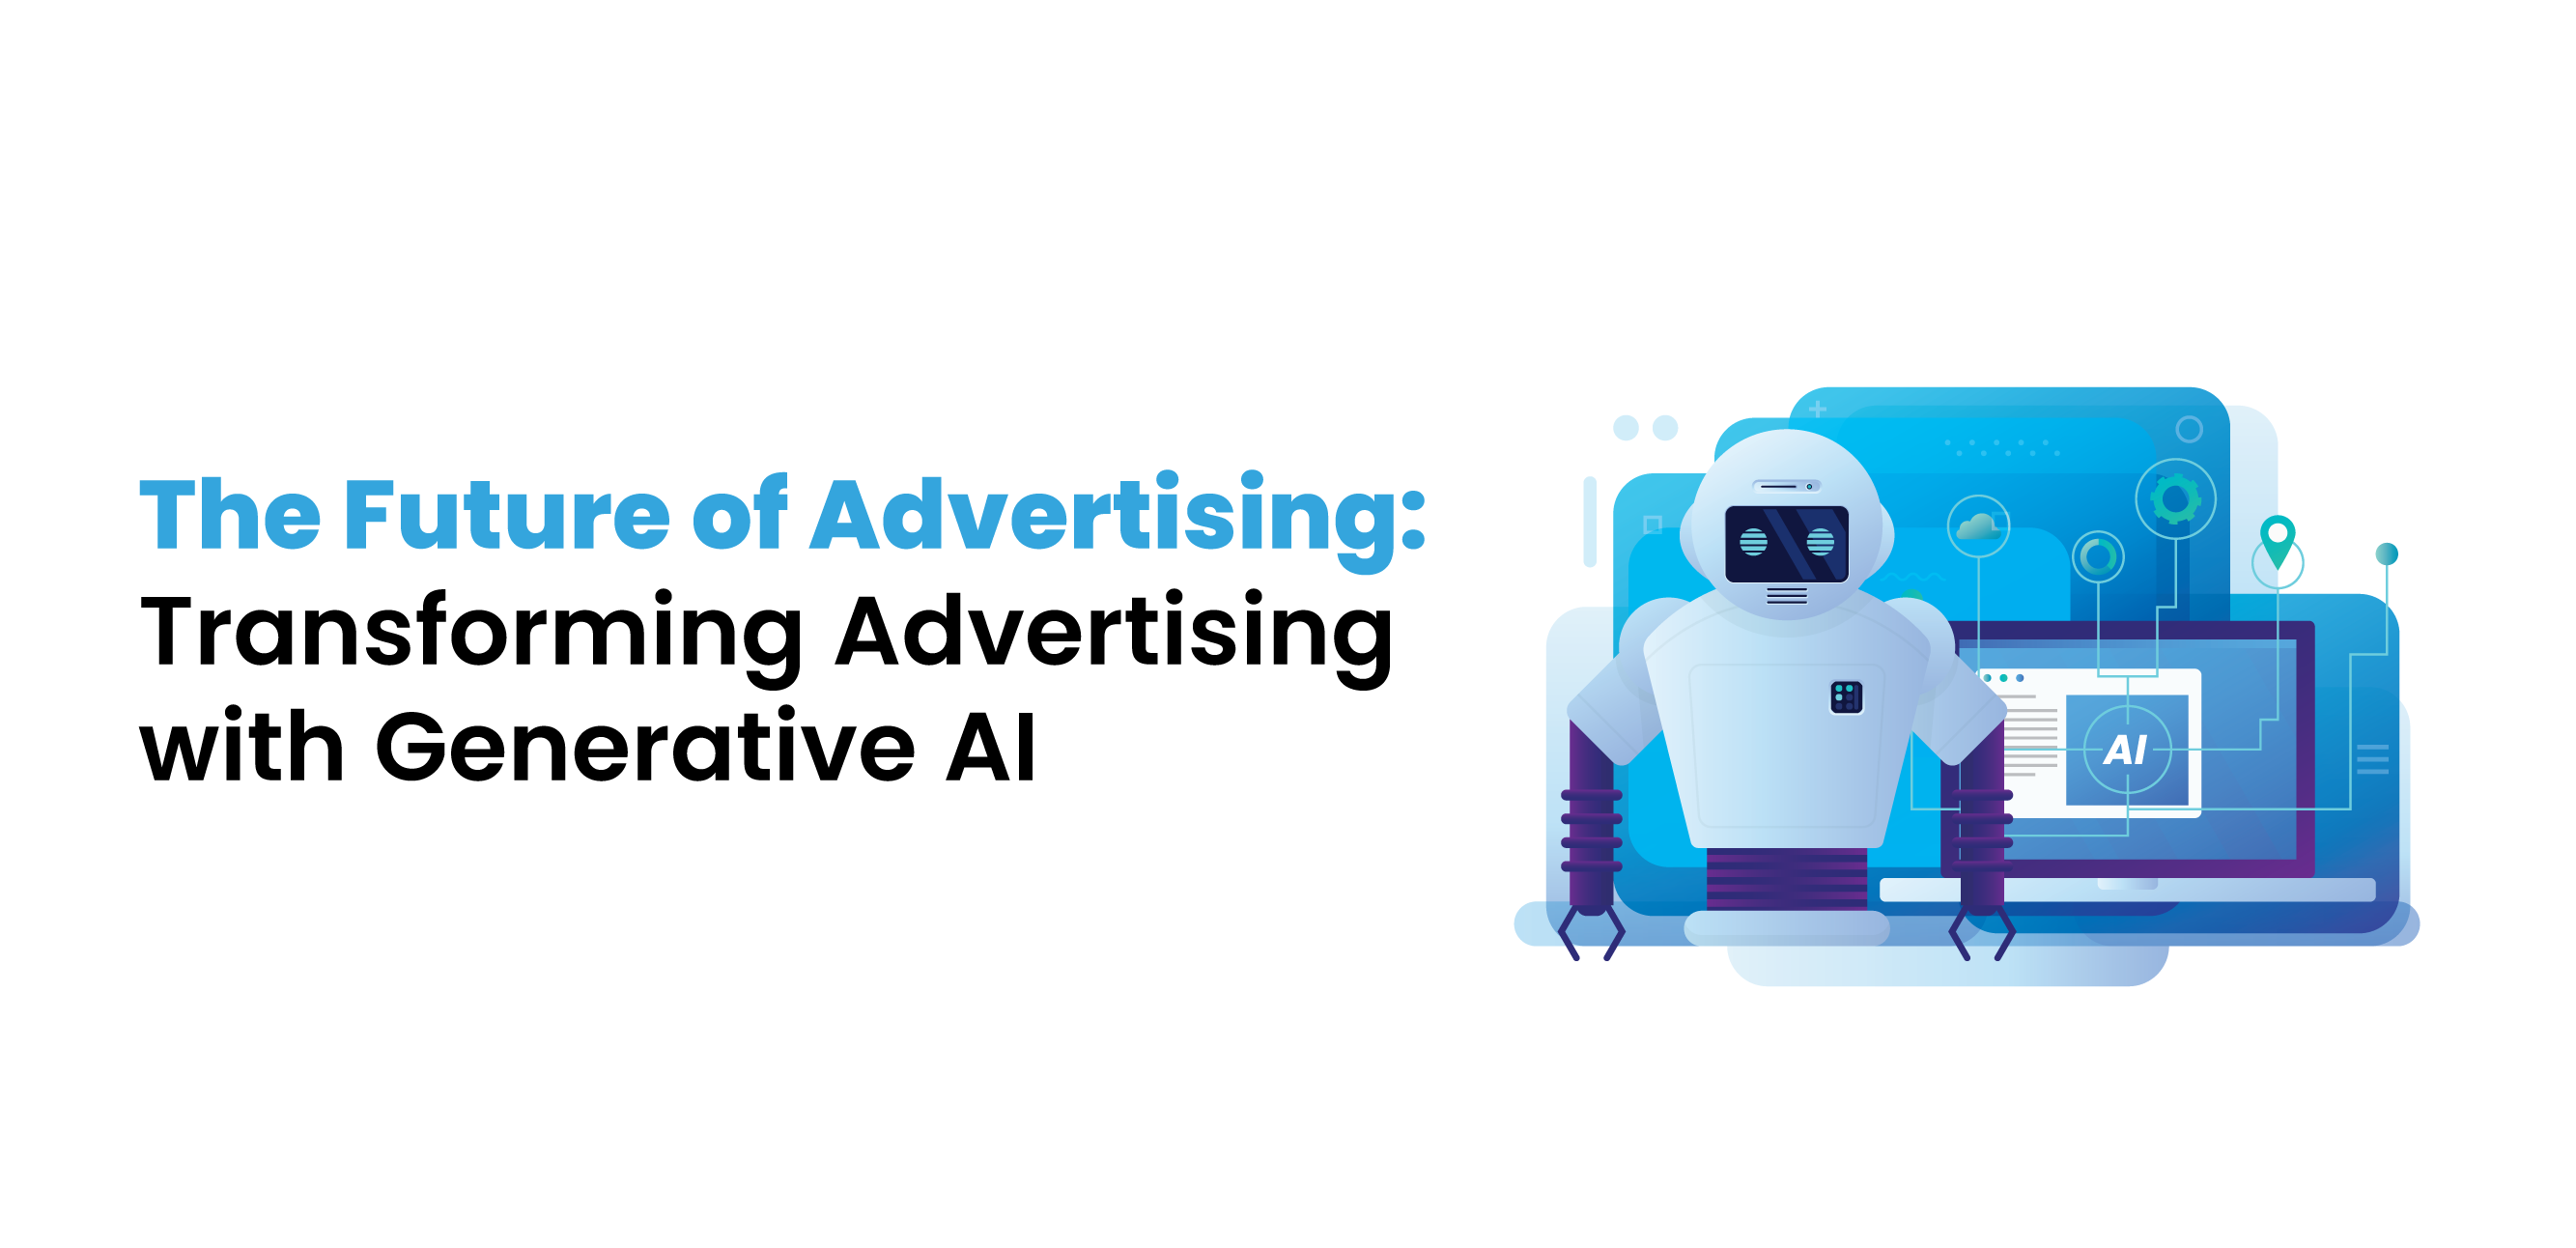 The Future of Advertising: Transforming Advertising with Generative AI